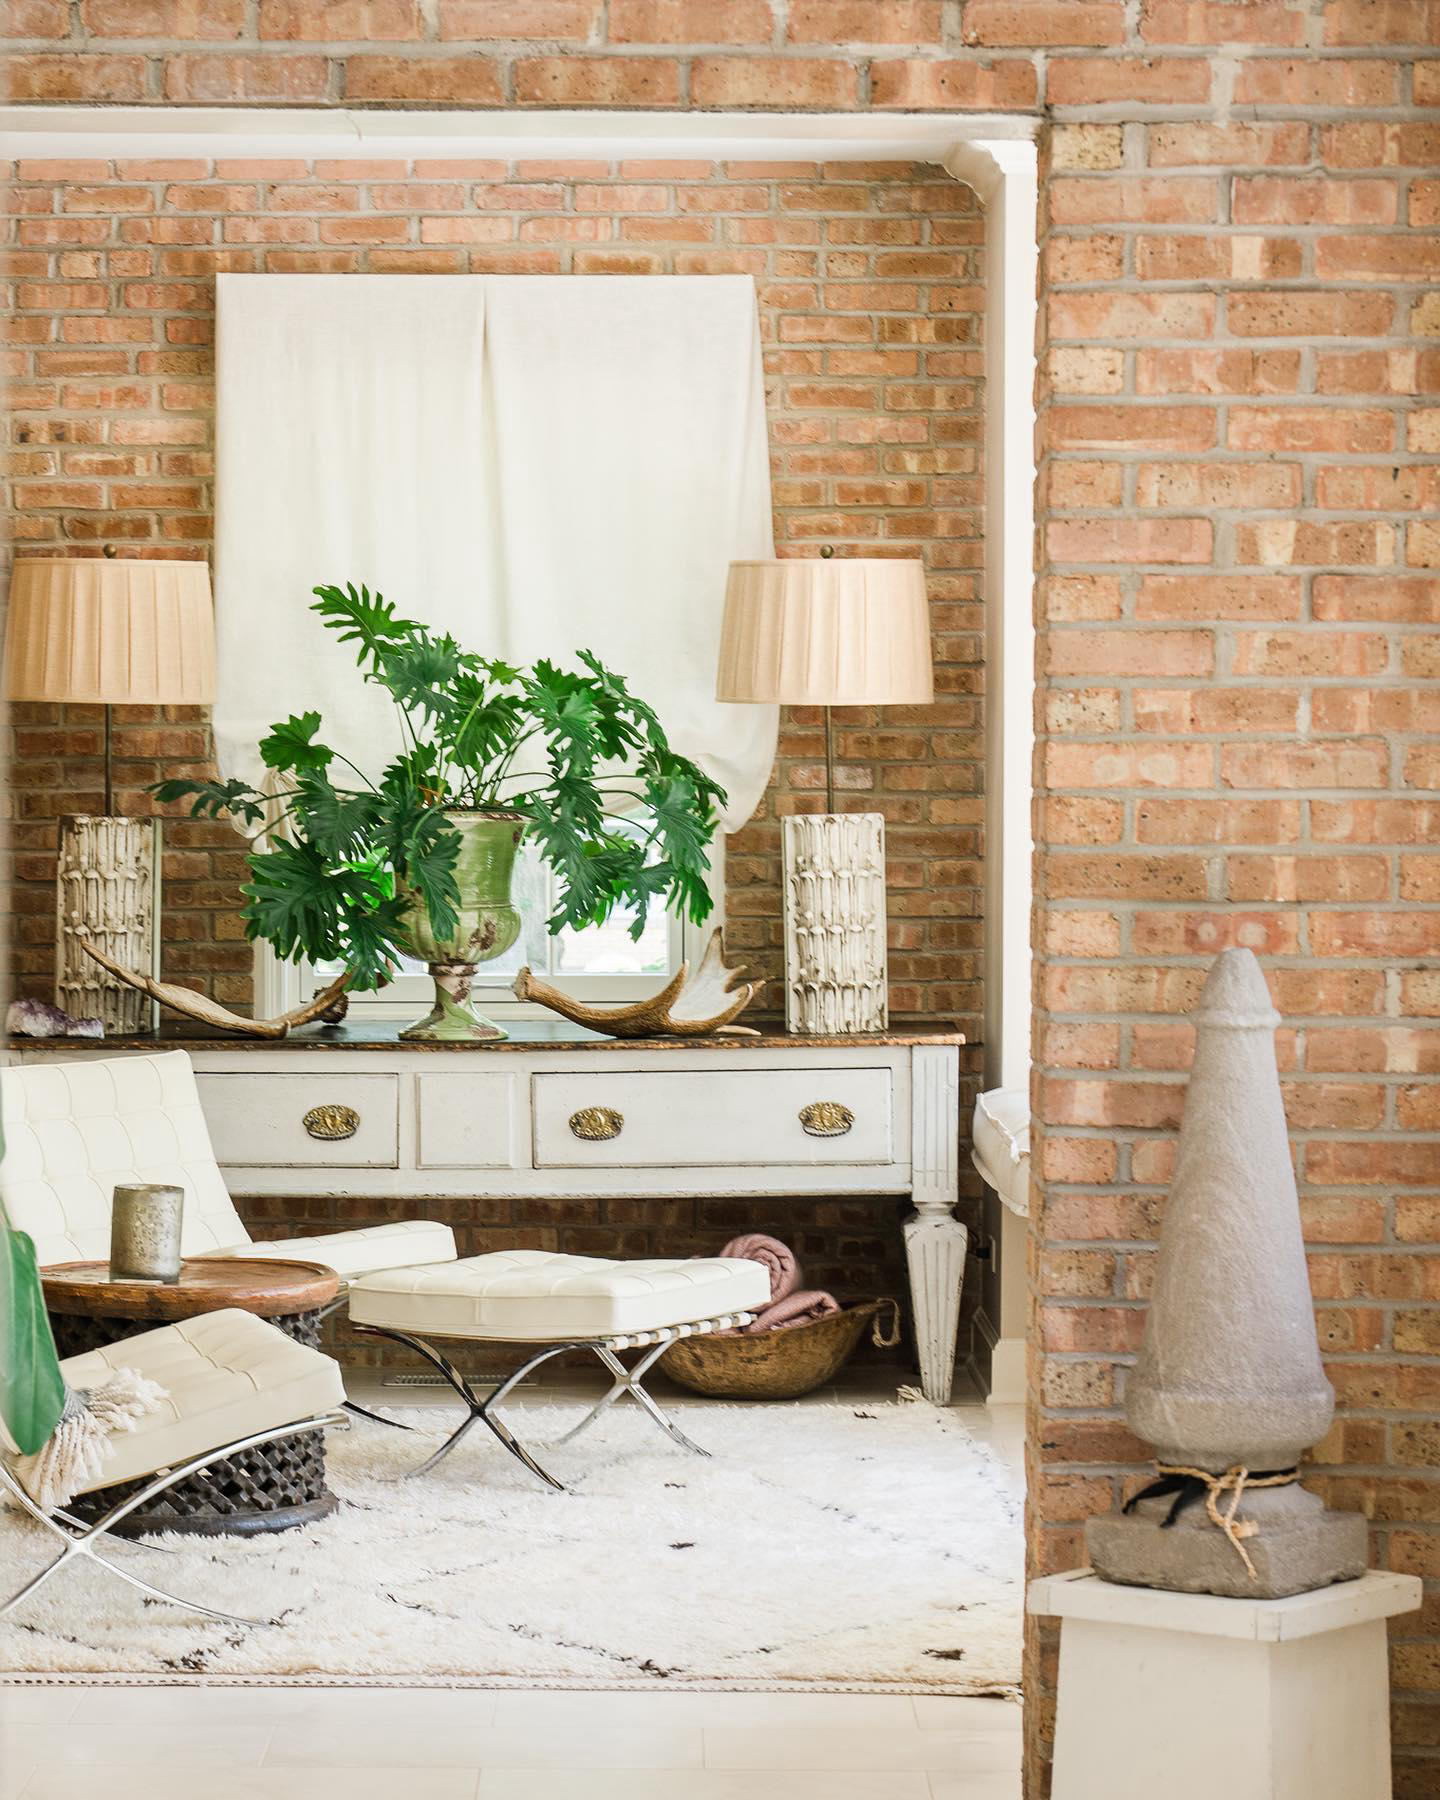 Dawn McKenna Group - Still swooning over all of the bohemian accents